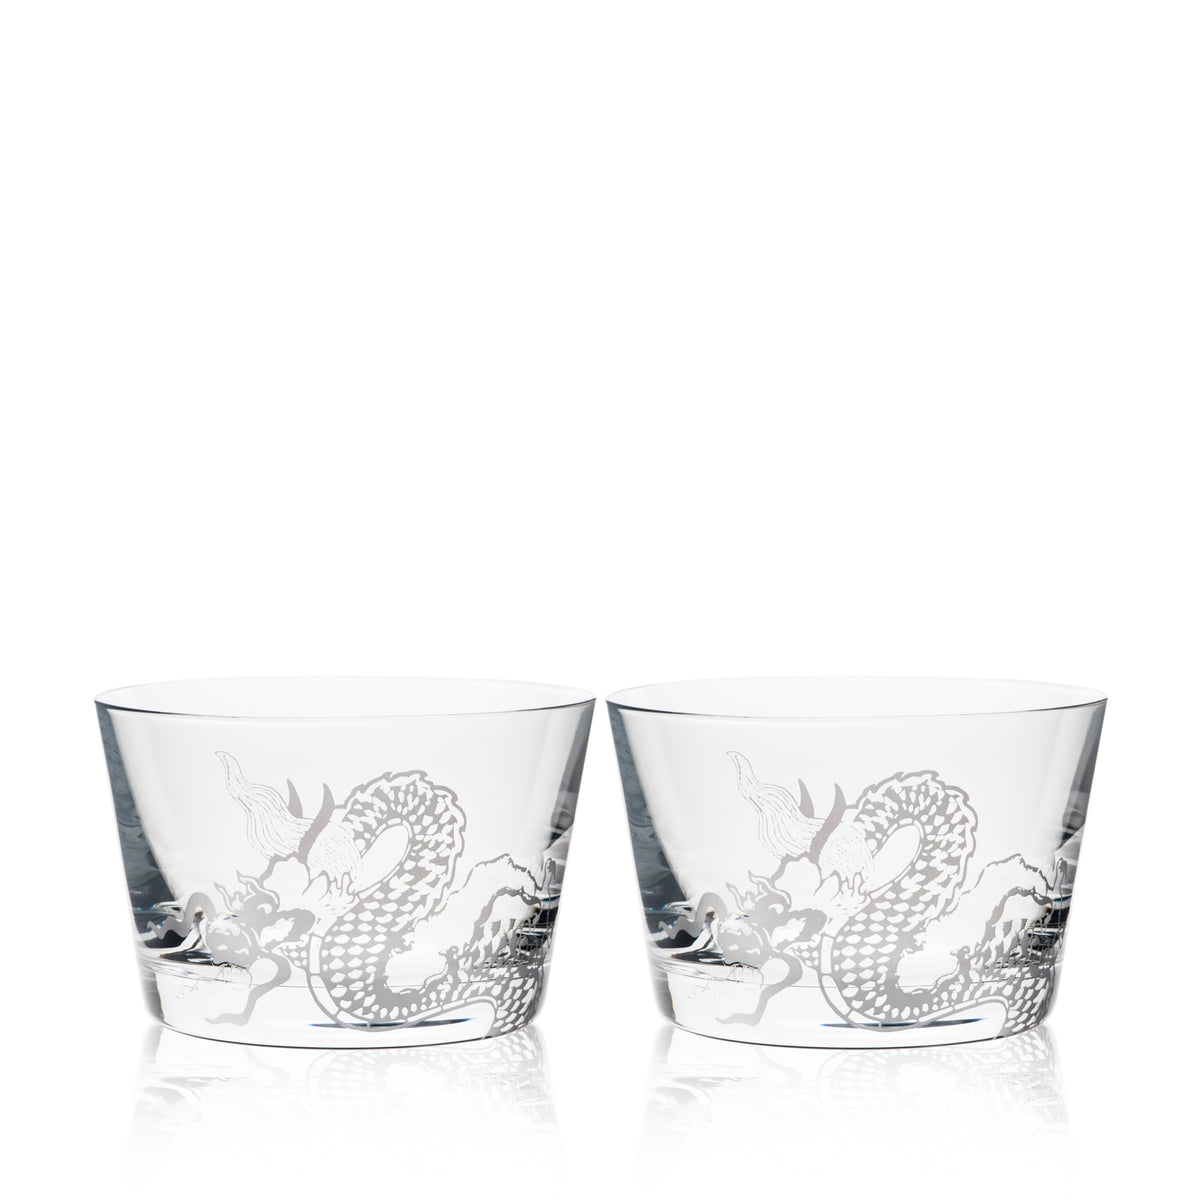 Dragon tidbit bowls set of two in sand-etched crystal from Caskata